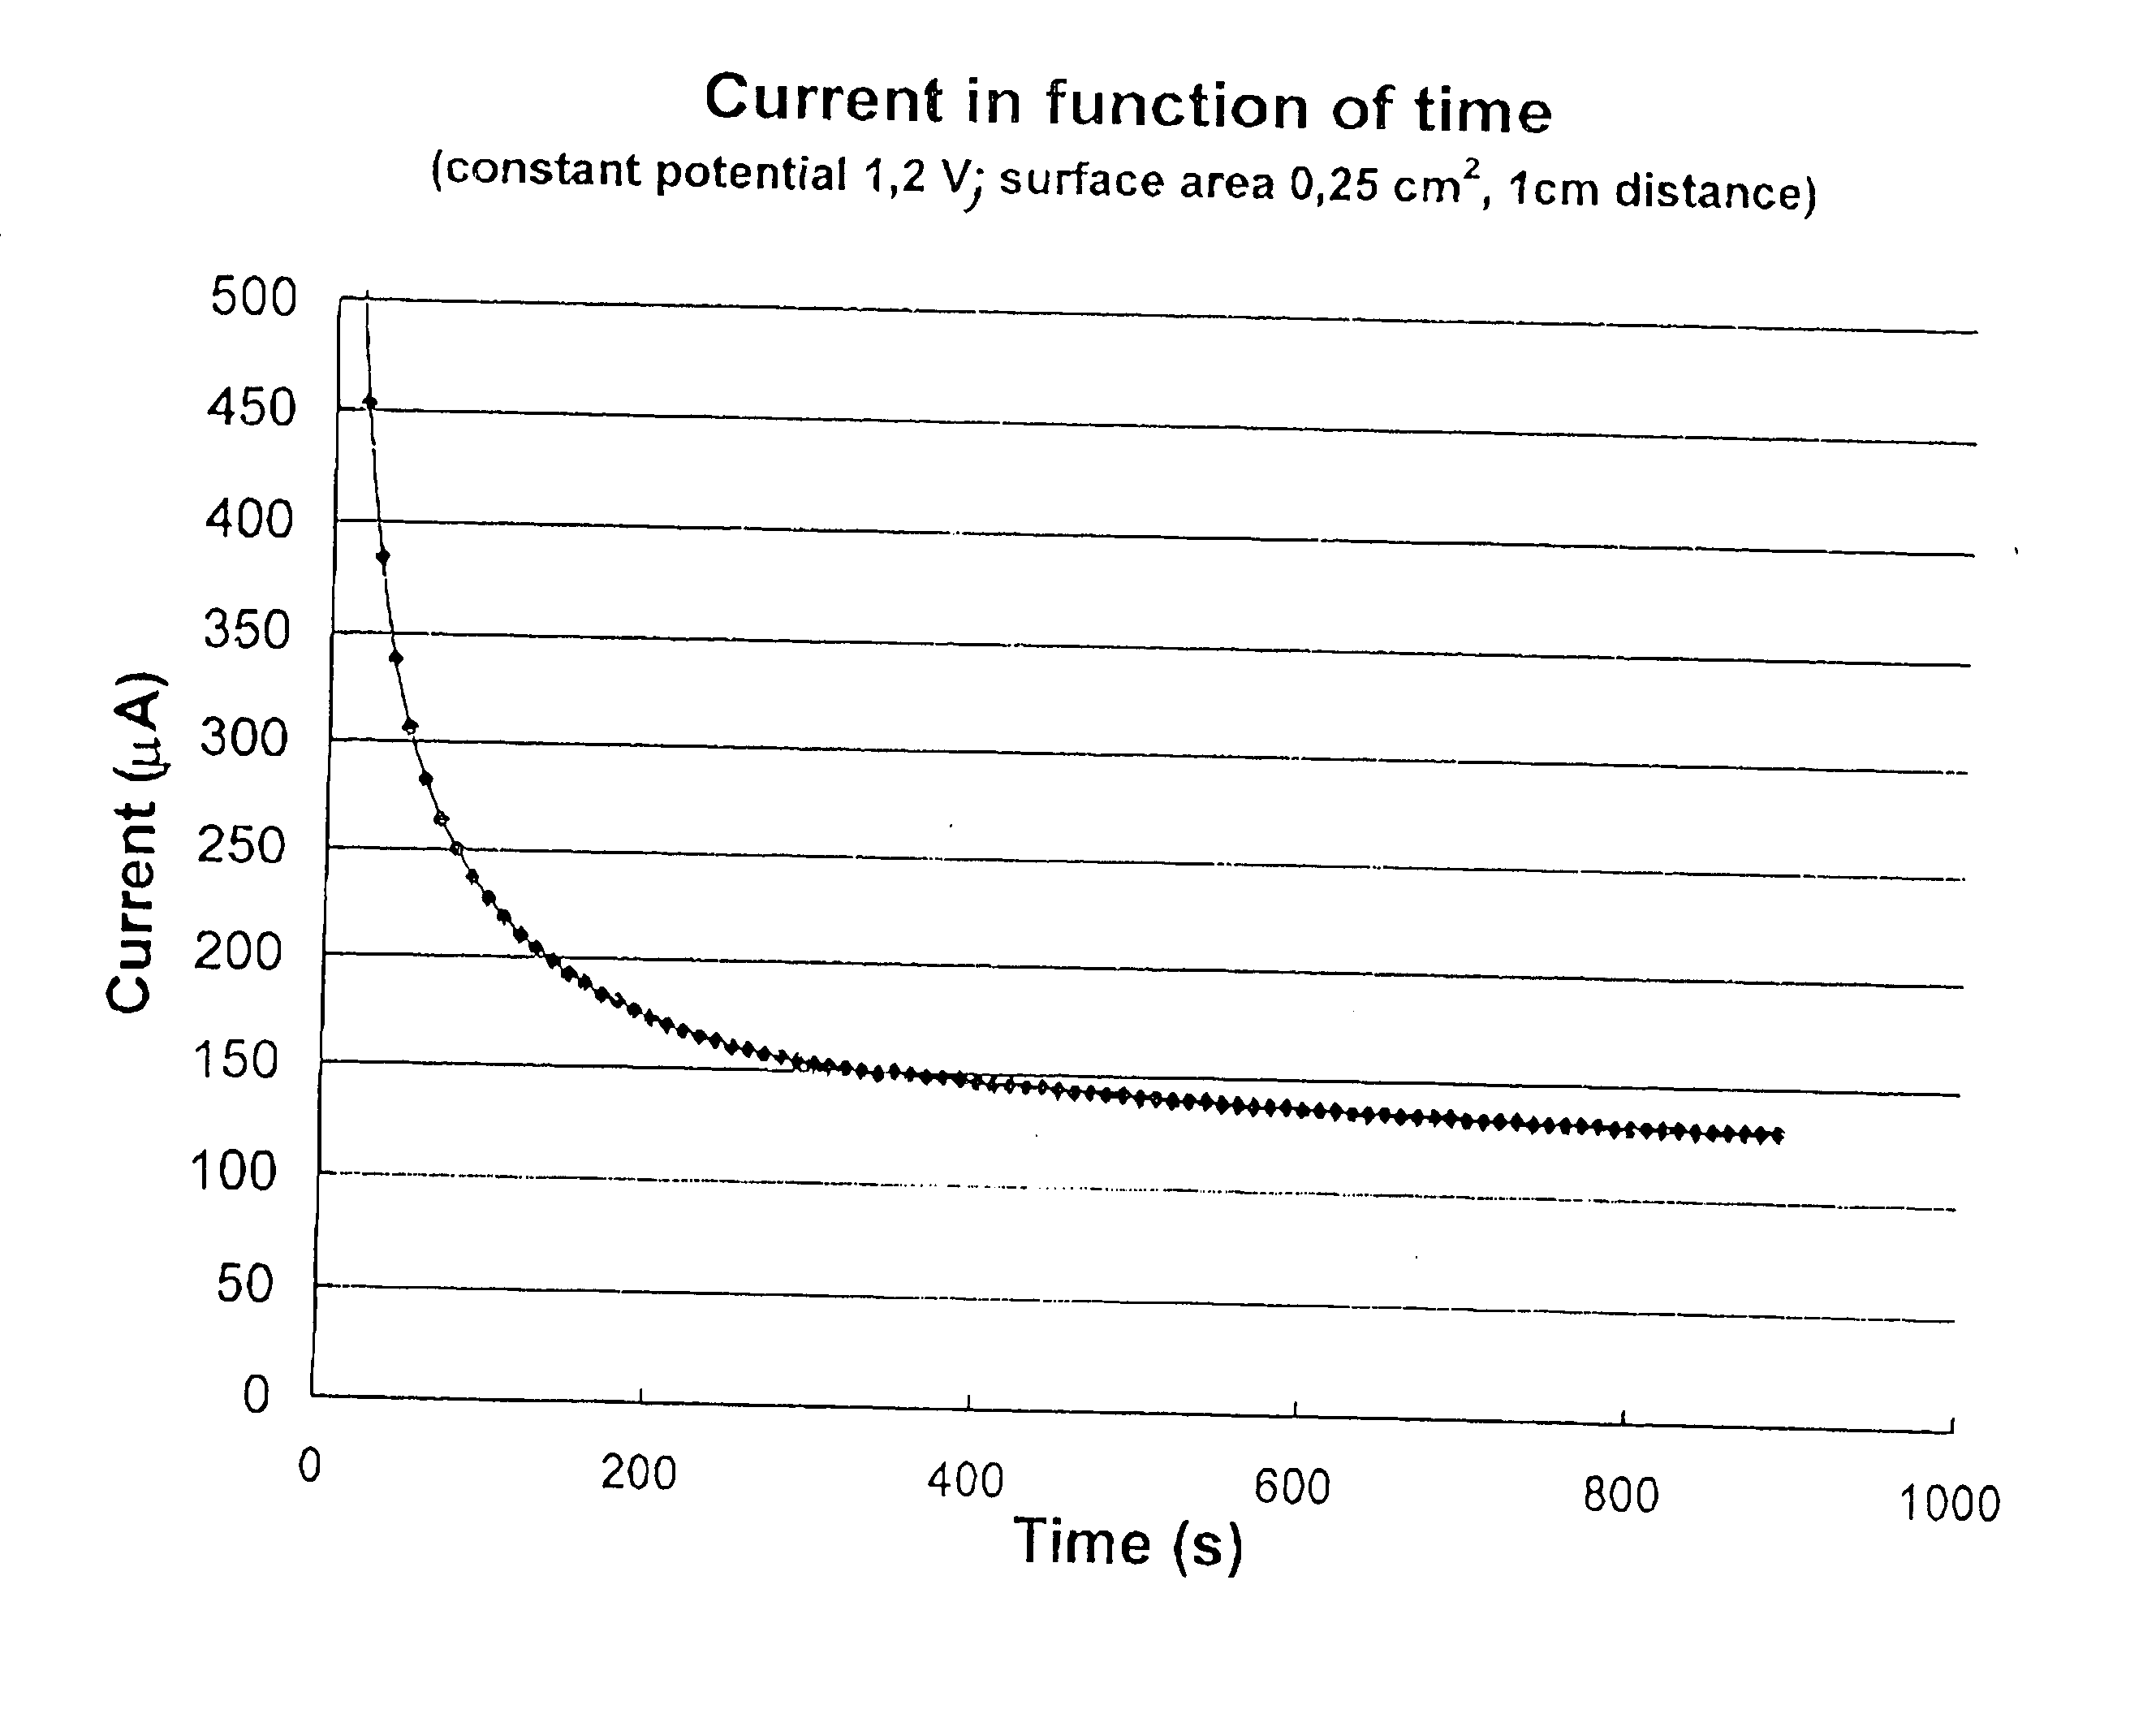 Corrosion inhibiting compositions and methods for fuel cell coolant systems